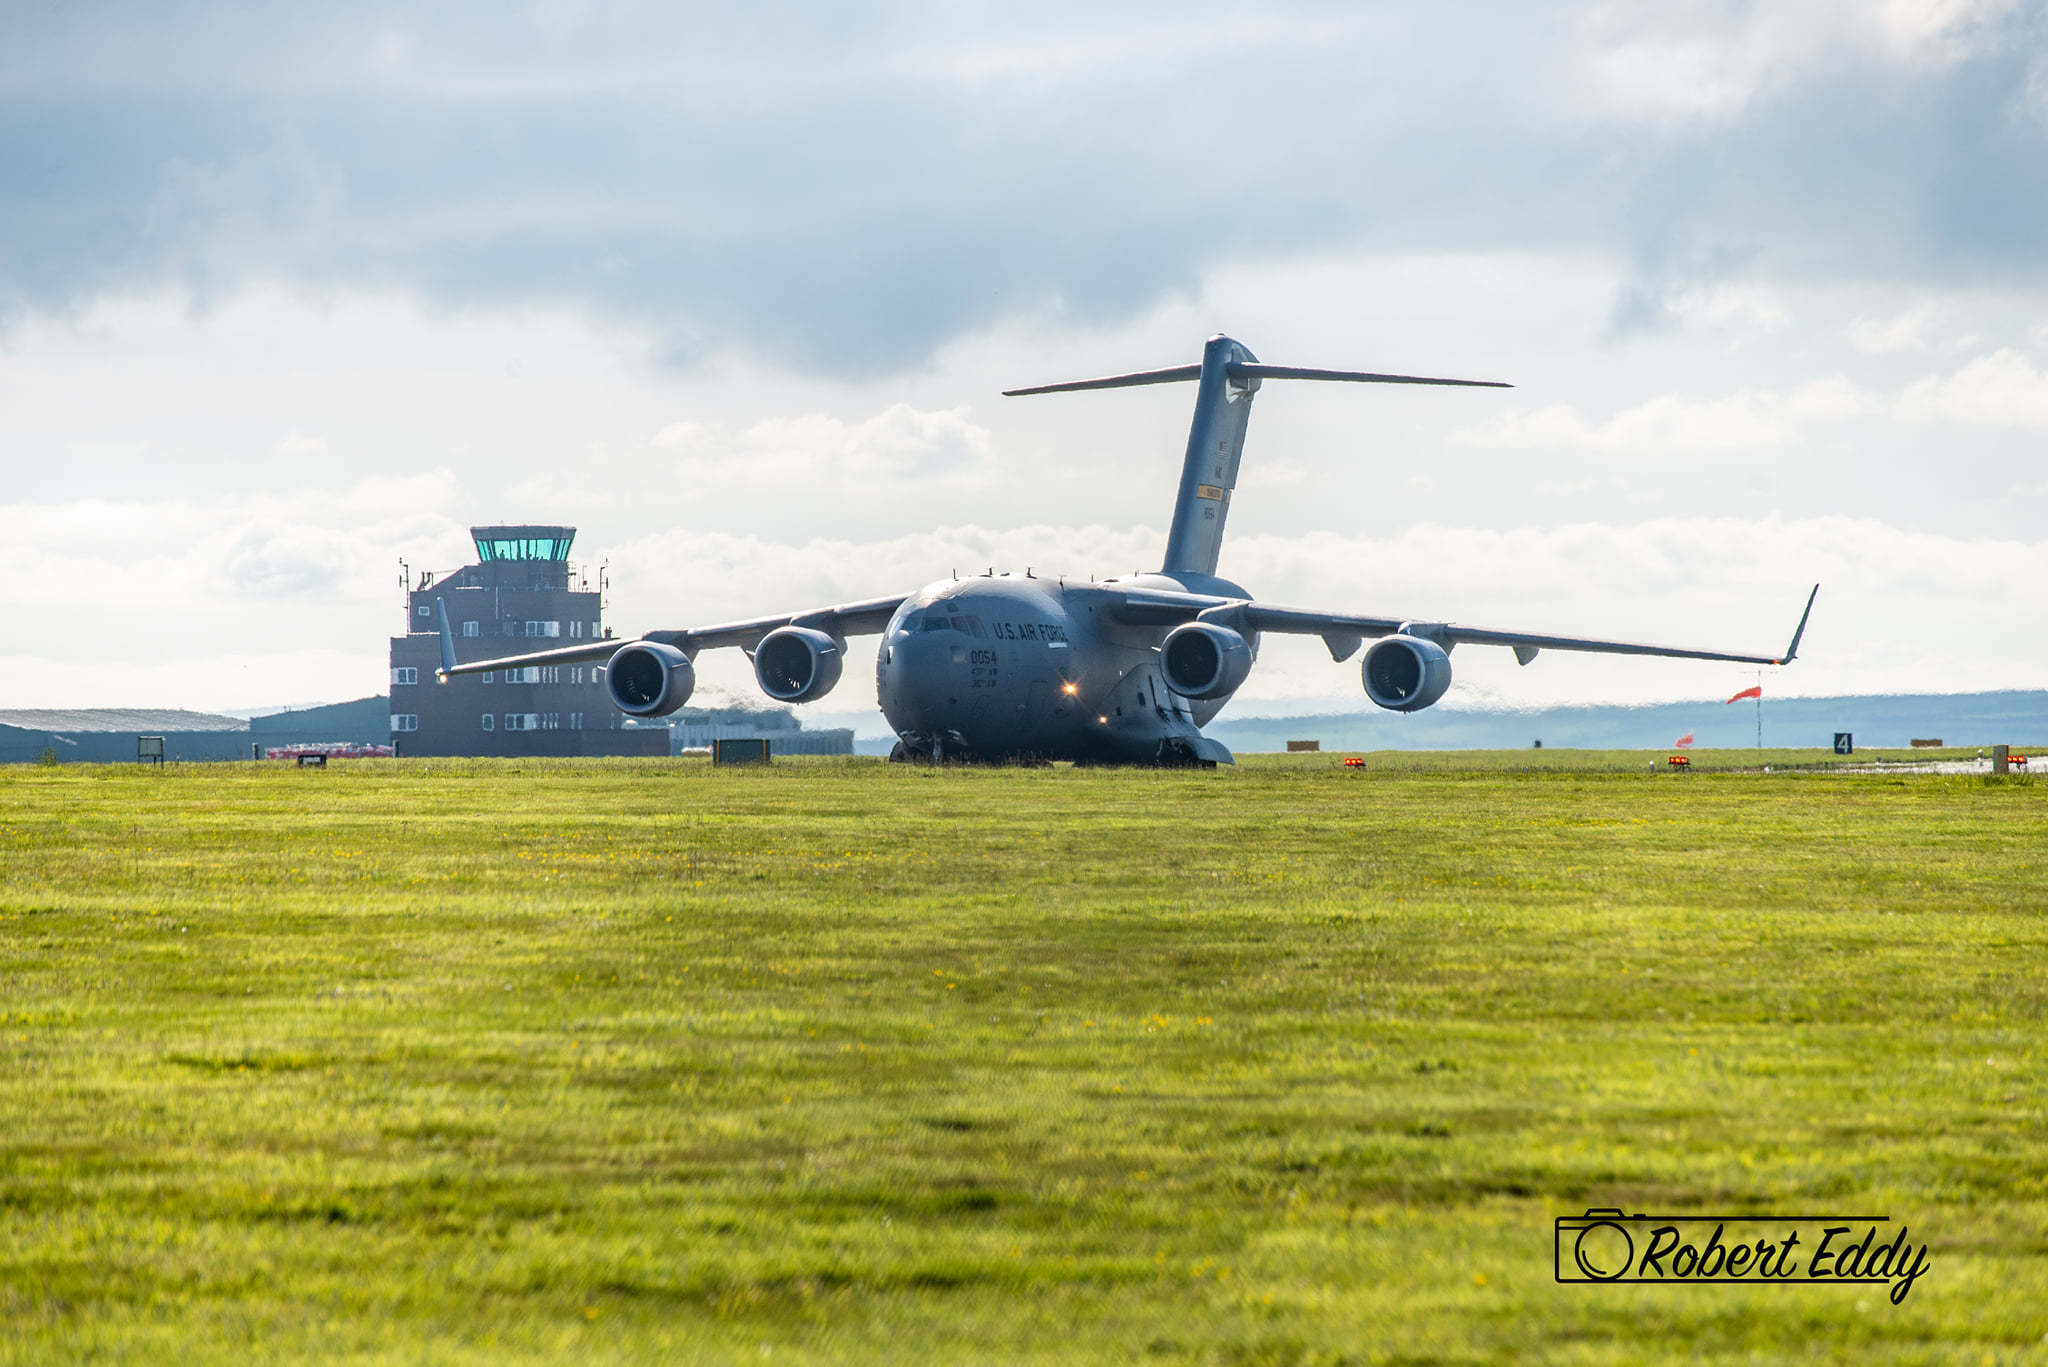 The US C-17 landed at RNAS Culdrose Picture: Robert Eddy/Packet Camera Club